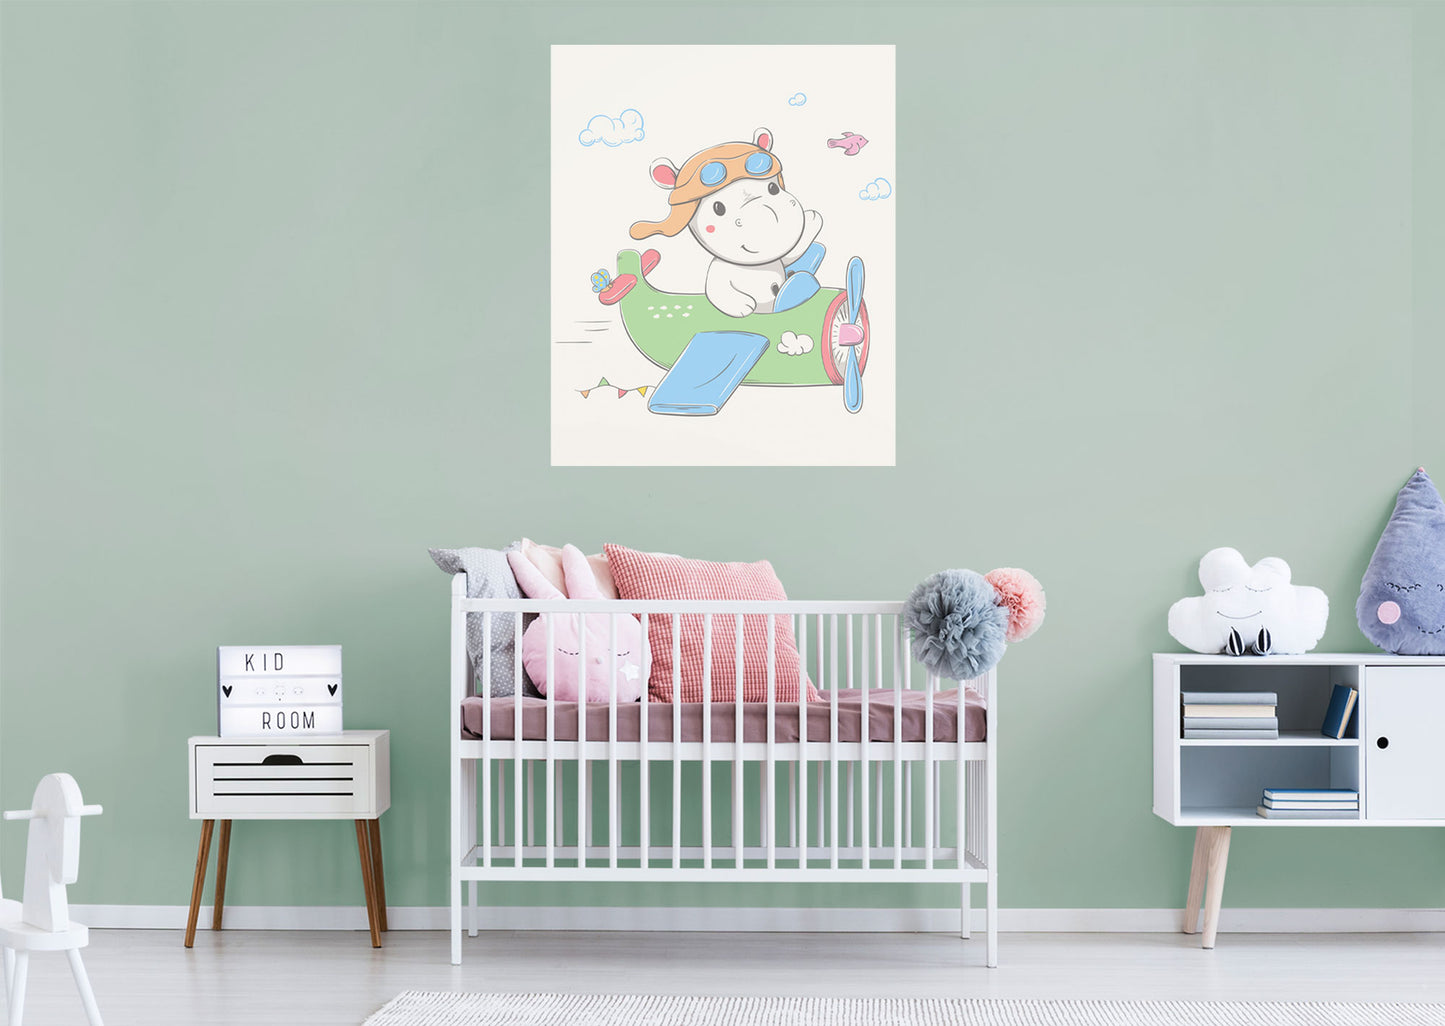 Nursery: Planes White Hipo Mural        -   Removable Wall   Adhesive Decal